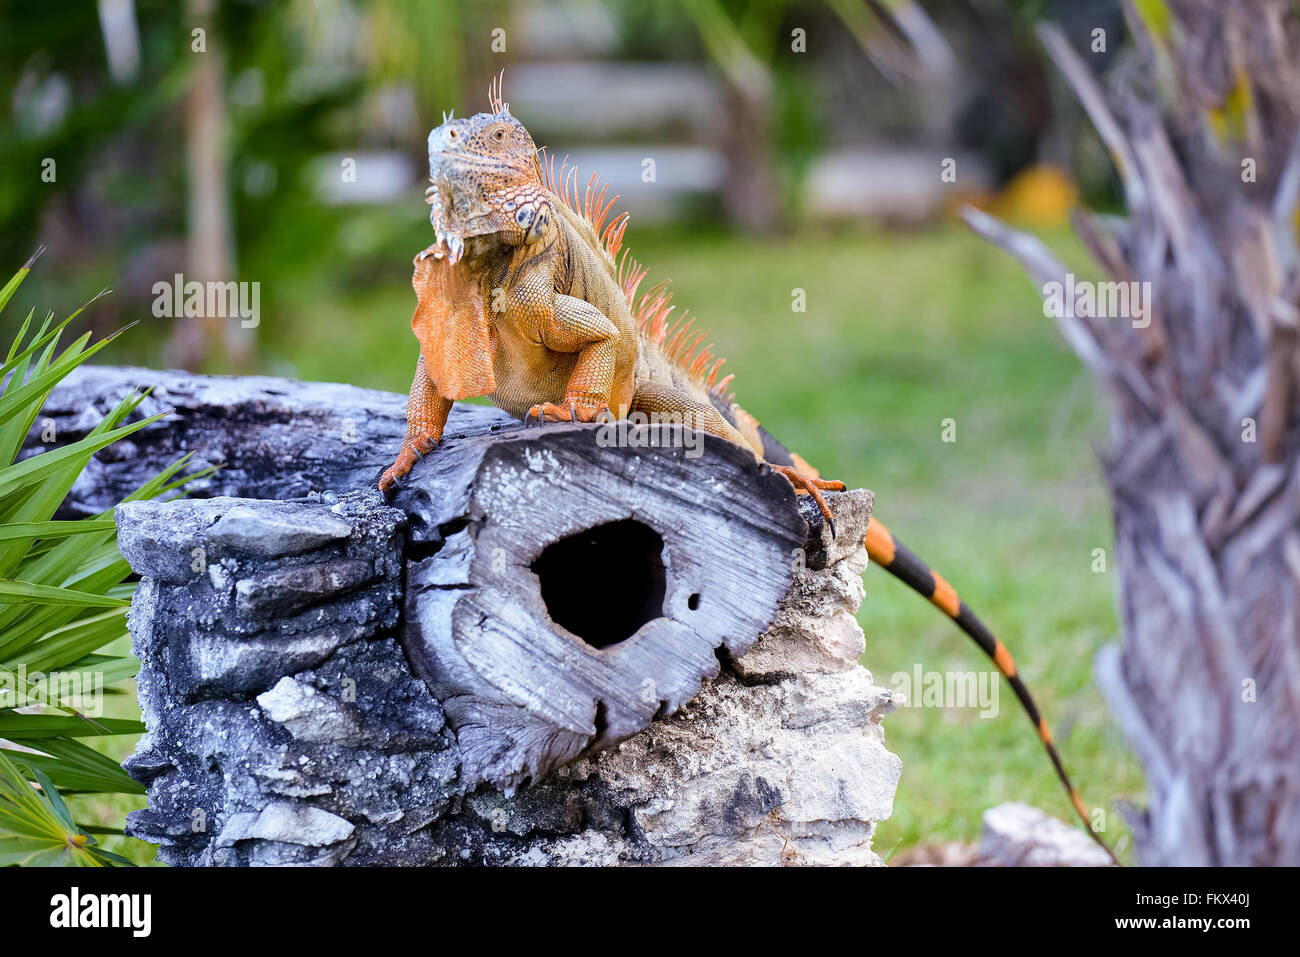 Mexico Iguana perched on a tree trunk Stock Photo